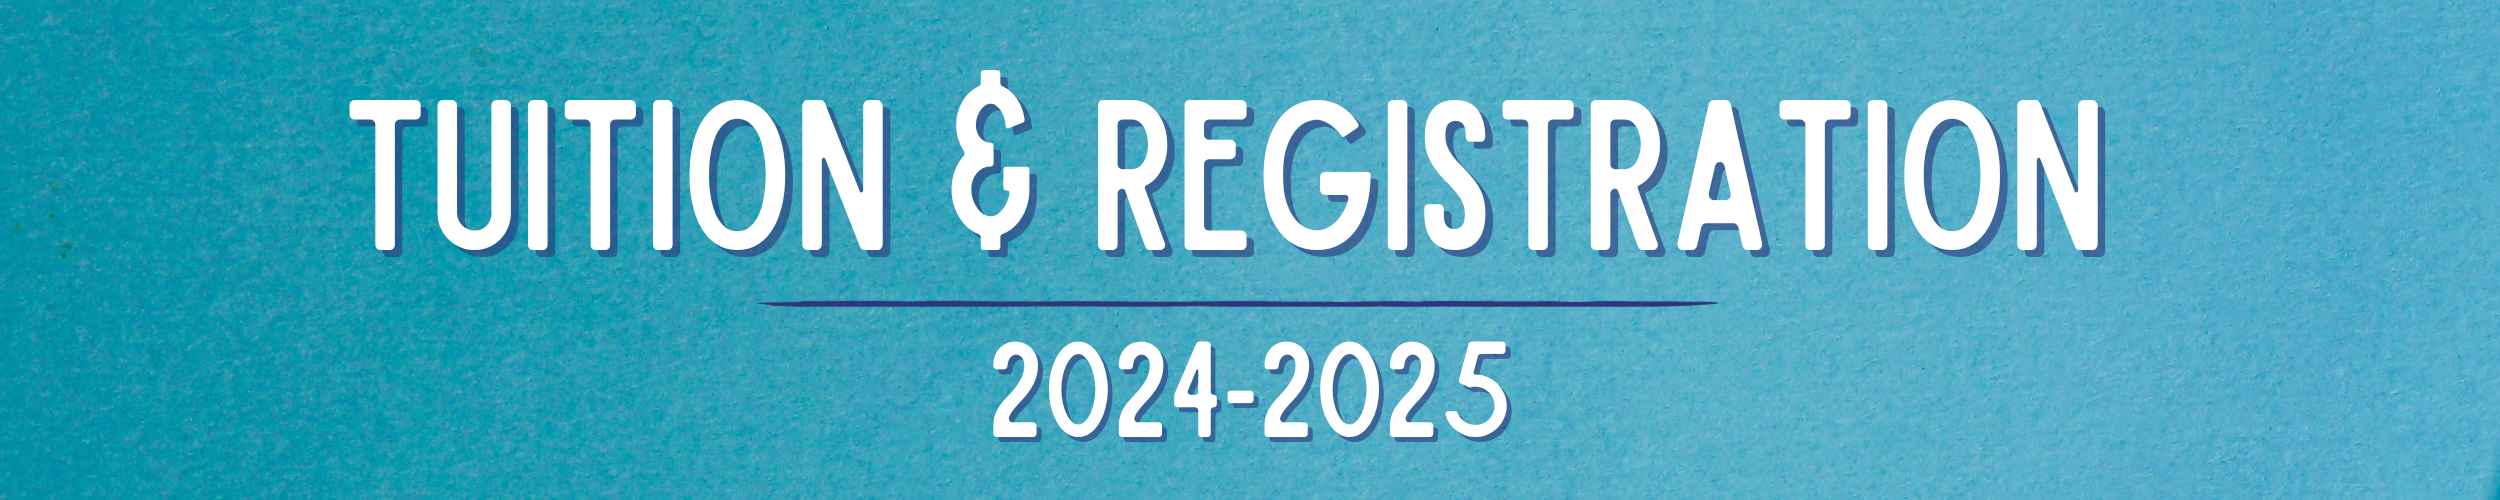 Tuition and Registration 2024-2025 button